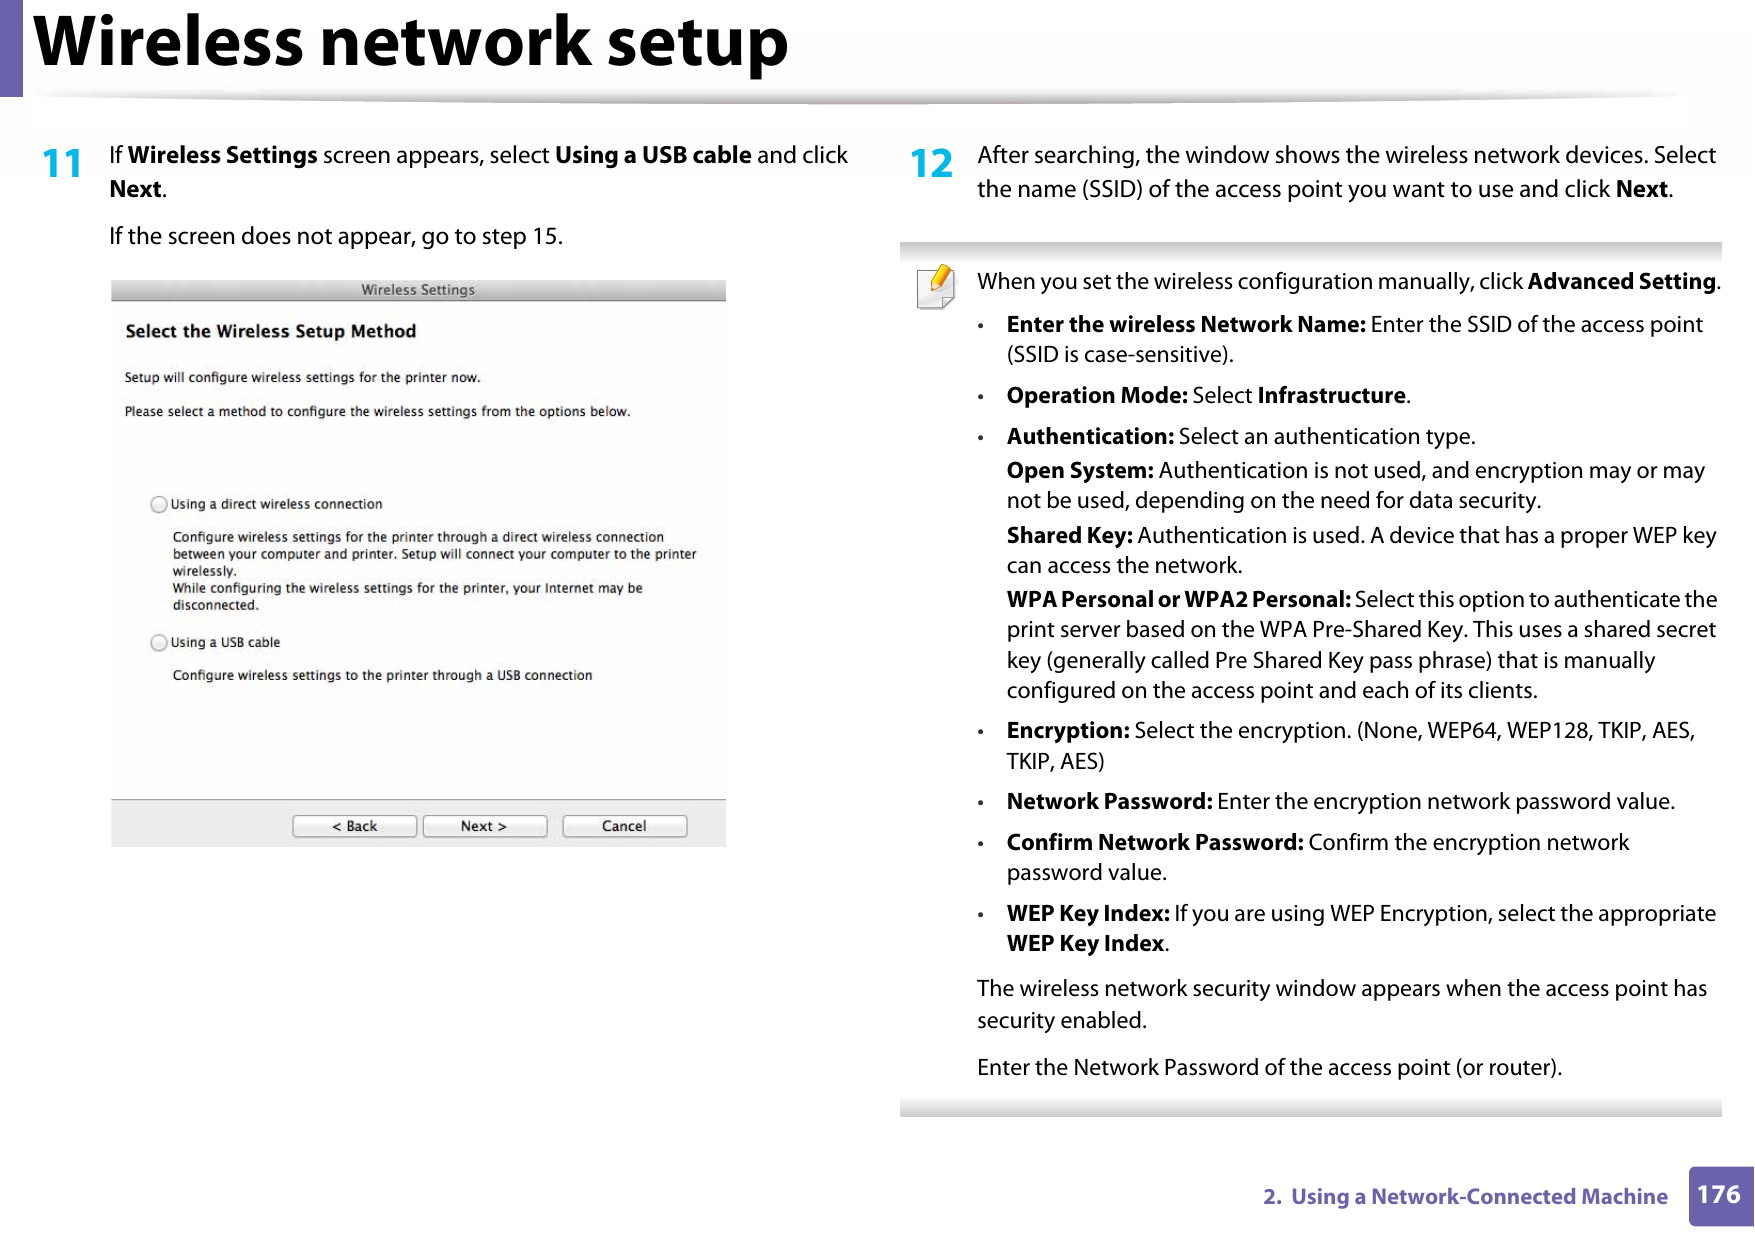 Wireless network setup1762.  Using a Network-Connected Machine11  If Wireless Settings screen appears, select Using a USB cable and click Next. If the screen does not appear, go to step 15.12  After searching, the window shows the wireless network devices. Select the name (SSID) of the access point you want to use and click Next. When you set the wireless configuration manually, click Advanced Setting.•Enter the wireless Network Name: Enter the SSID of the access point (SSID is case-sensitive).•Operation Mode: Select Infrastructure.•Authentication: Select an authentication type.Open System: Authentication is not used, and encryption may or may not be used, depending on the need for data security.Shared Key: Authentication is used. A device that has a proper WEP key can access the network.WPA Personal or WPA2 Personal: Select this option to authenticate the print server based on the WPA Pre-Shared Key. This uses a shared secret key (generally called Pre Shared Key pass phrase) that is manually configured on the access point and each of its clients.•Encryption: Select the encryption. (None, WEP64, WEP128, TKIP, AES, TKIP, AES)•Network Password: Enter the encryption network password value.•Confirm Network Password: Confirm the encryption network password value.•WEP Key Index: If you are using WEP Encryption, select the appropriate WEP Key Index.The wireless network security window appears when the access point has security enabled.Enter the Network Password of the access point (or router). 